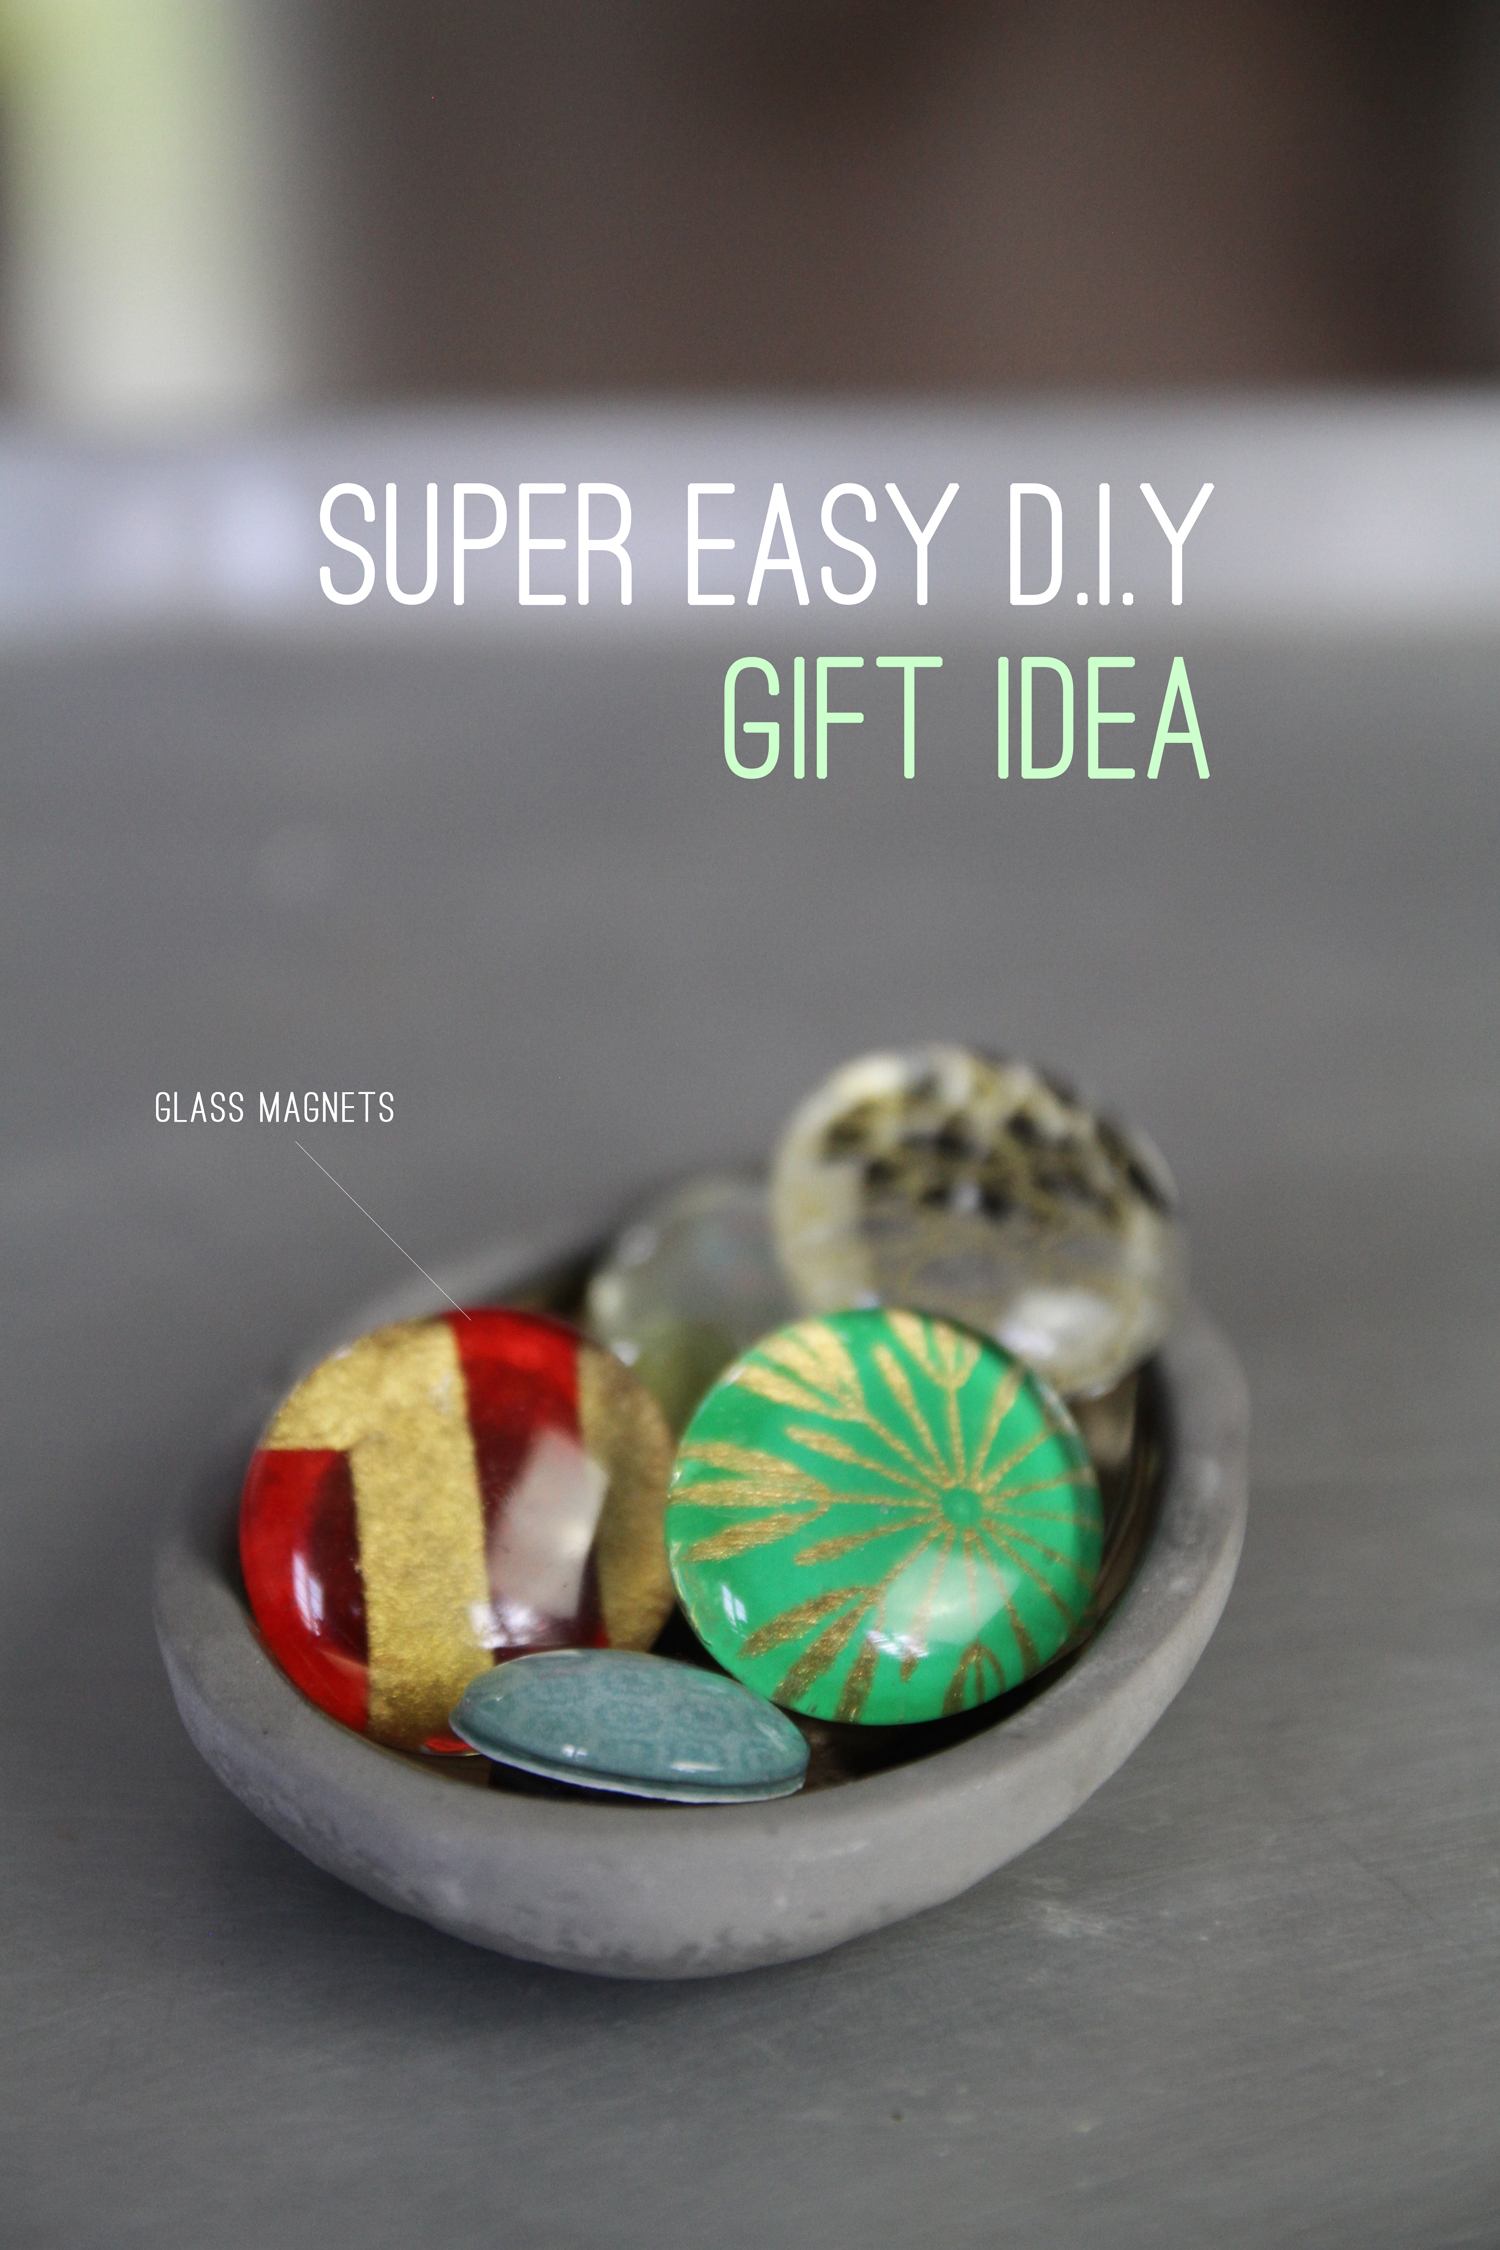 How to Make Beautiful Glass Pebble Magnets – An Easy Craft